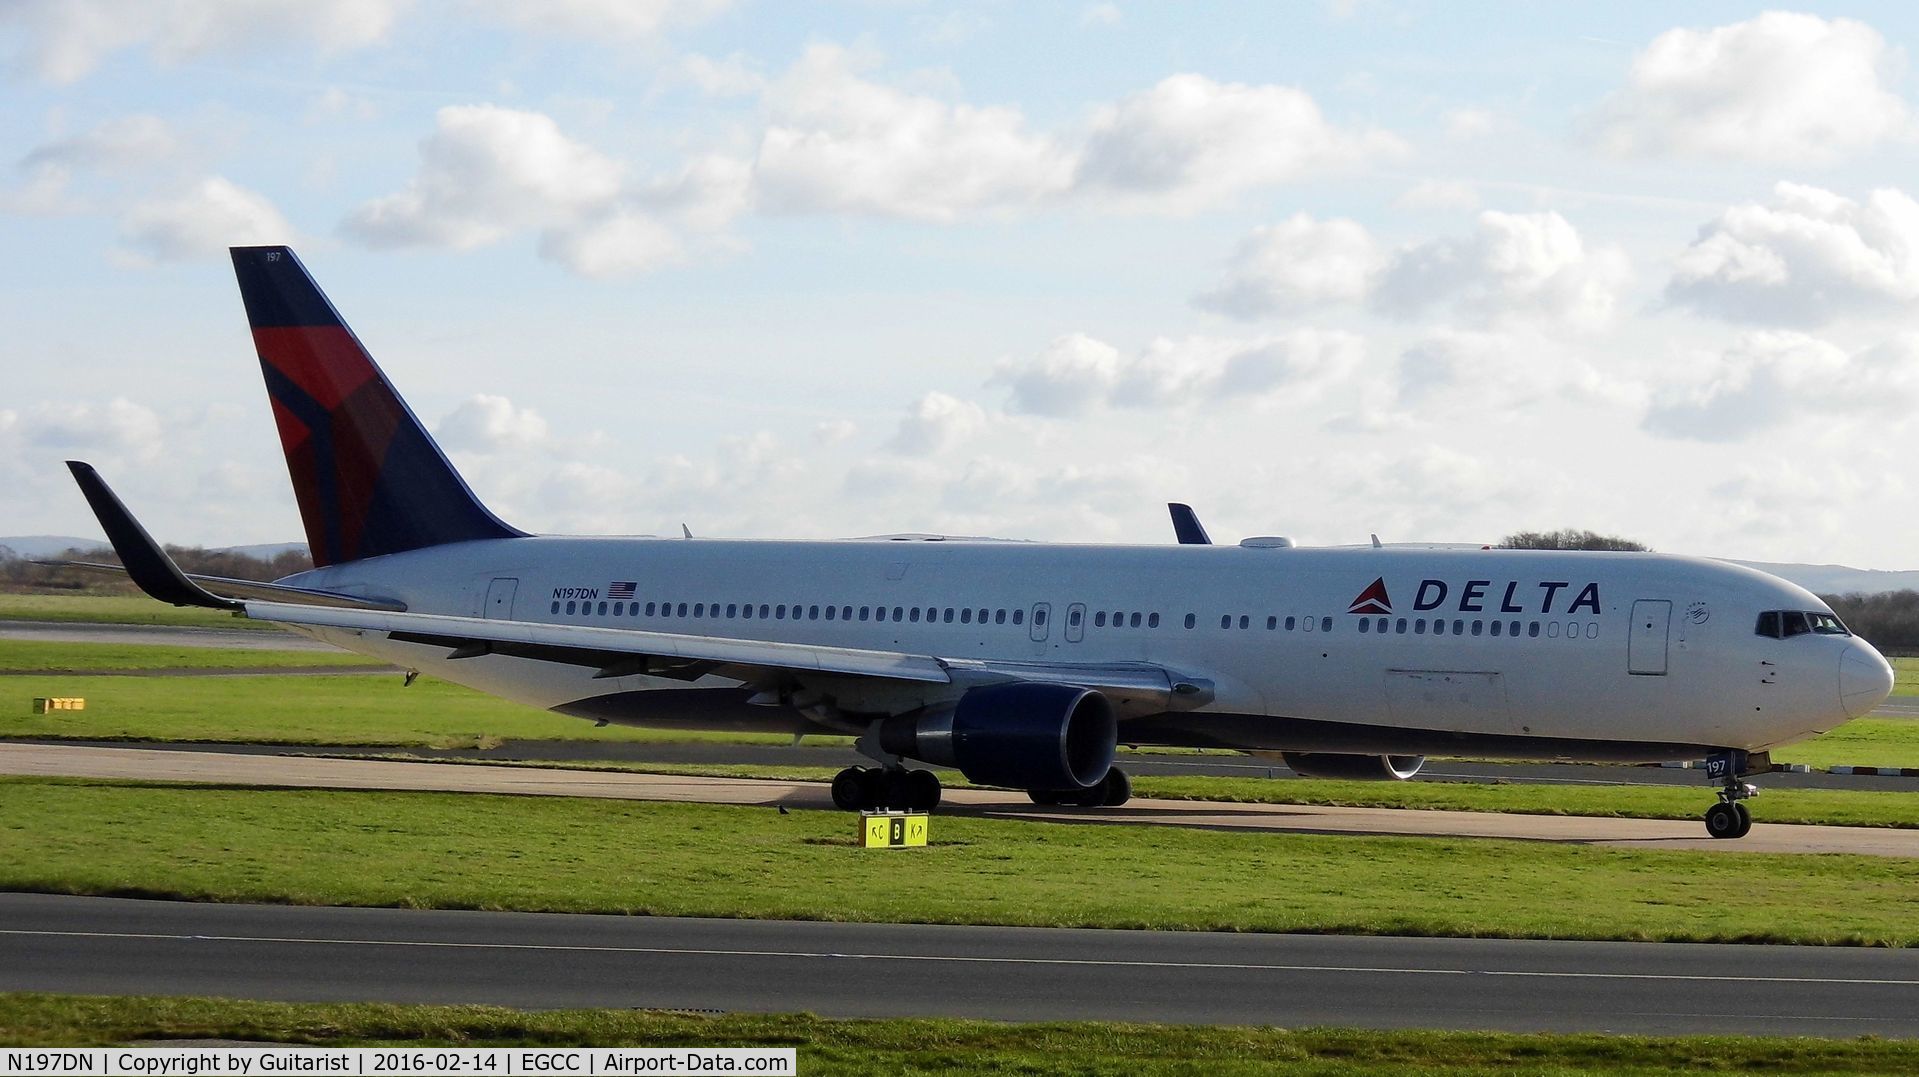 N197DN, 1997 Boeing 767-332 C/N 28454, At Manchester